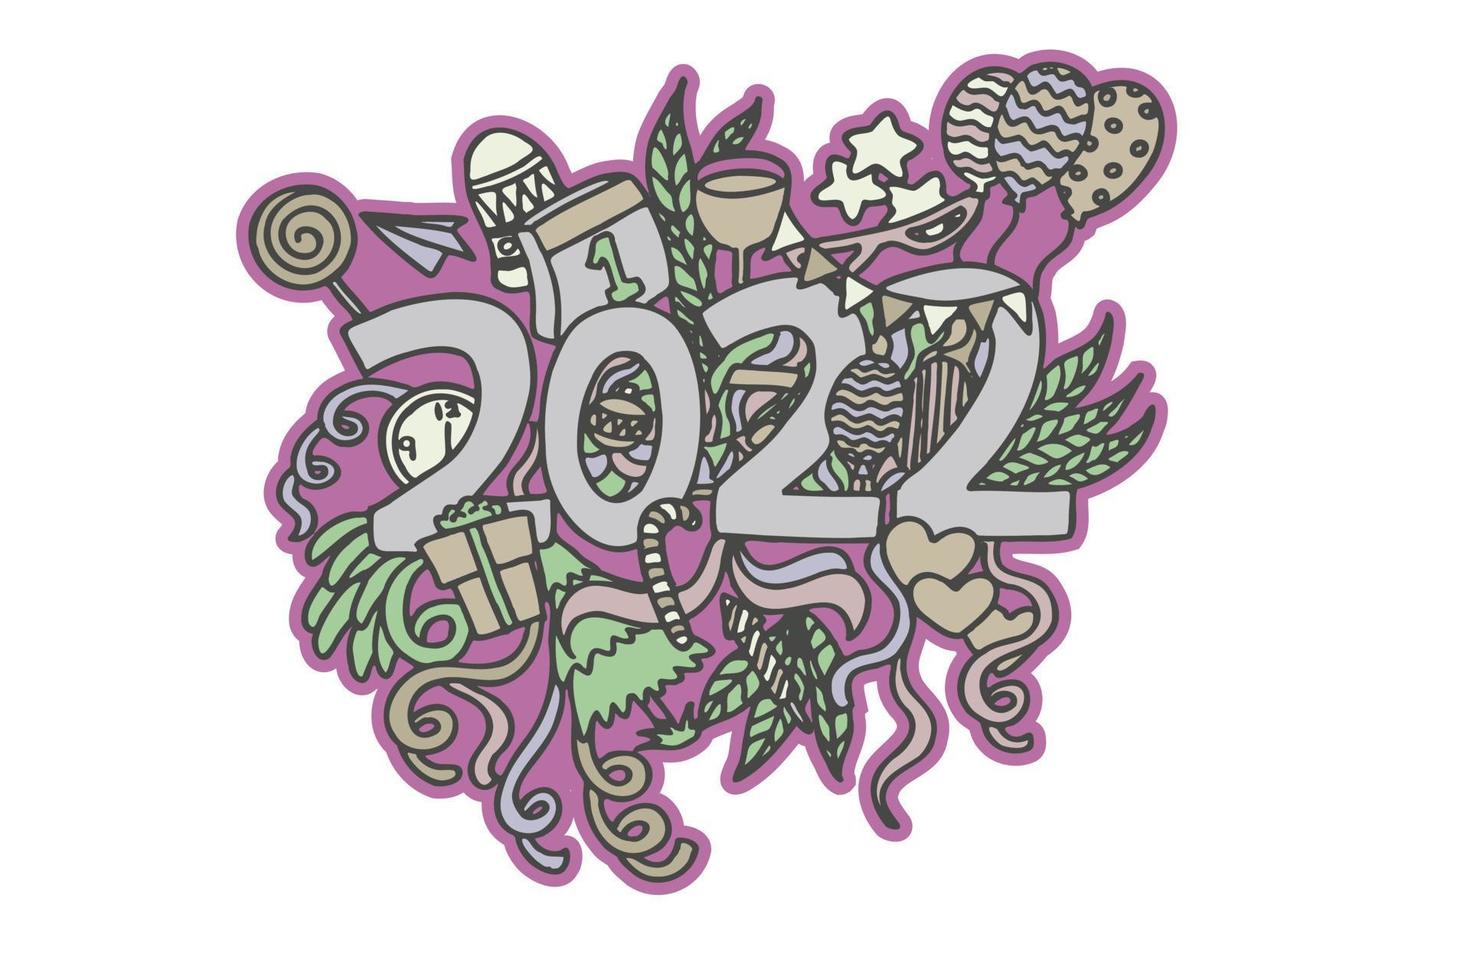 Happy new year 2022 abstract doodles vector